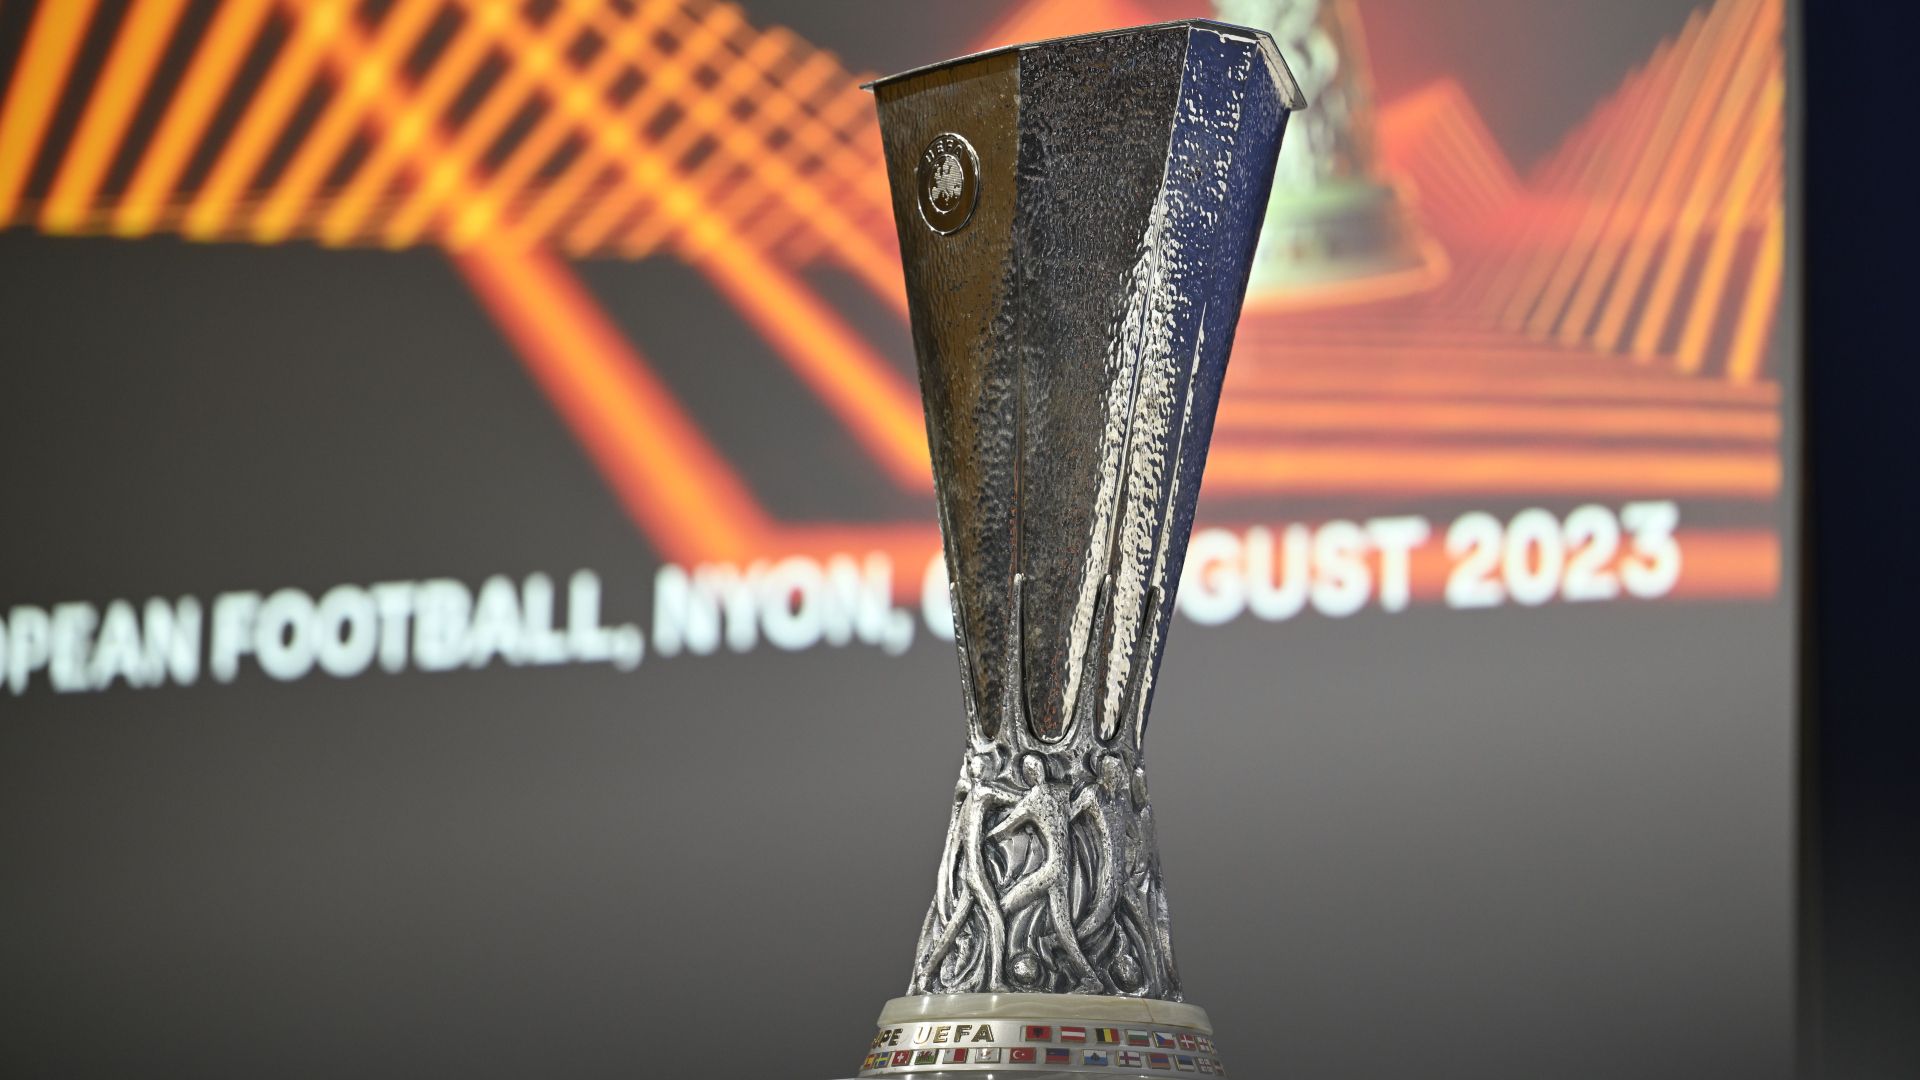 Champions League play-off draw: Ajax would face Apoel or Qarabag